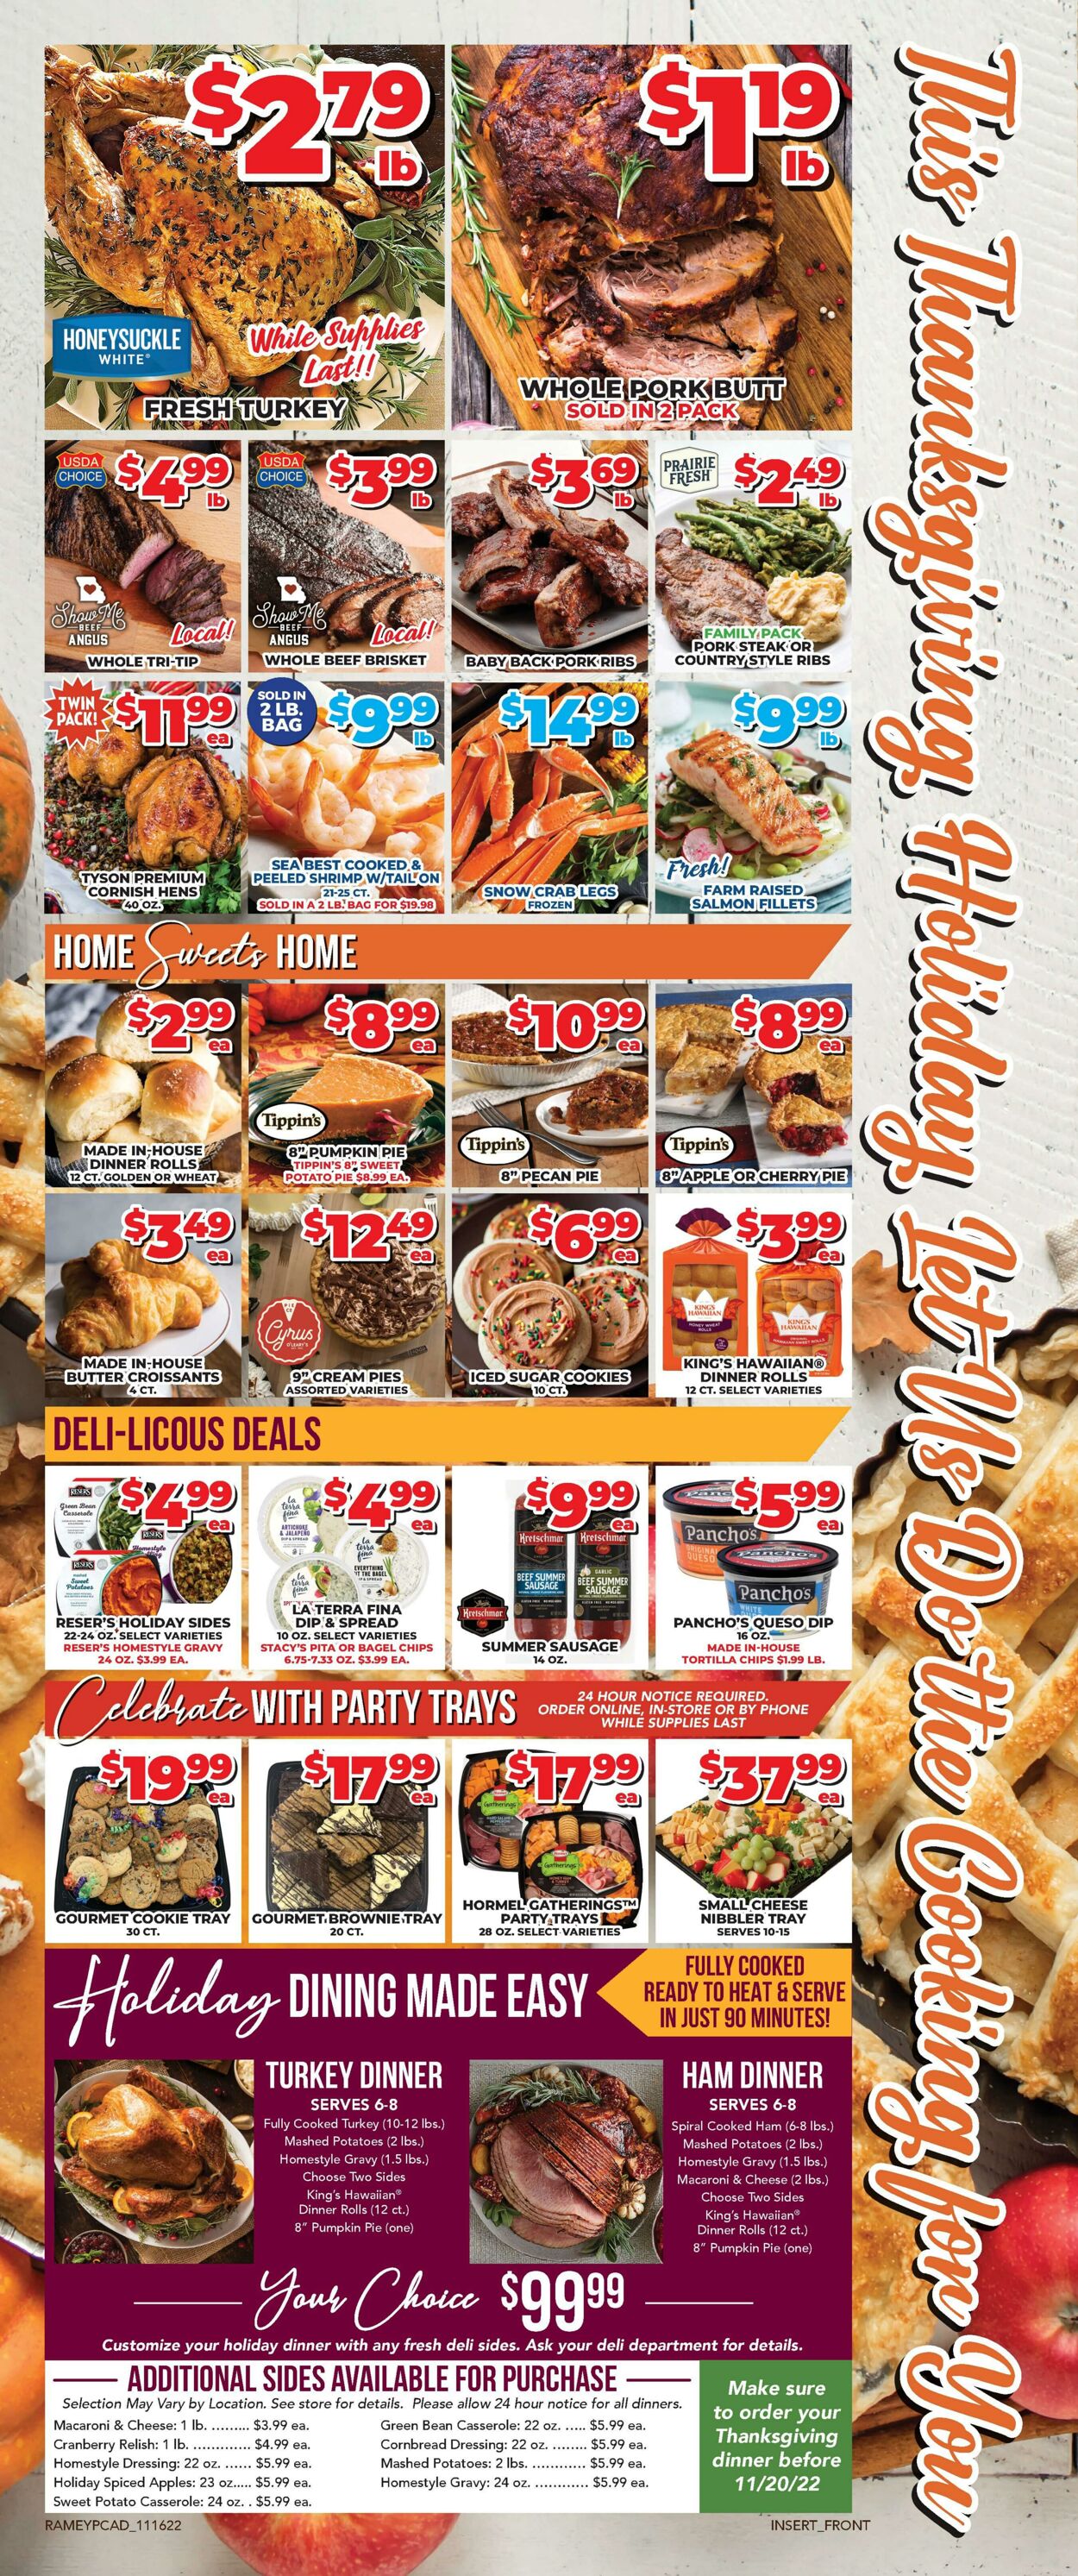 Weekly ad Price Cutter 11/16/2022 - 11/24/2022